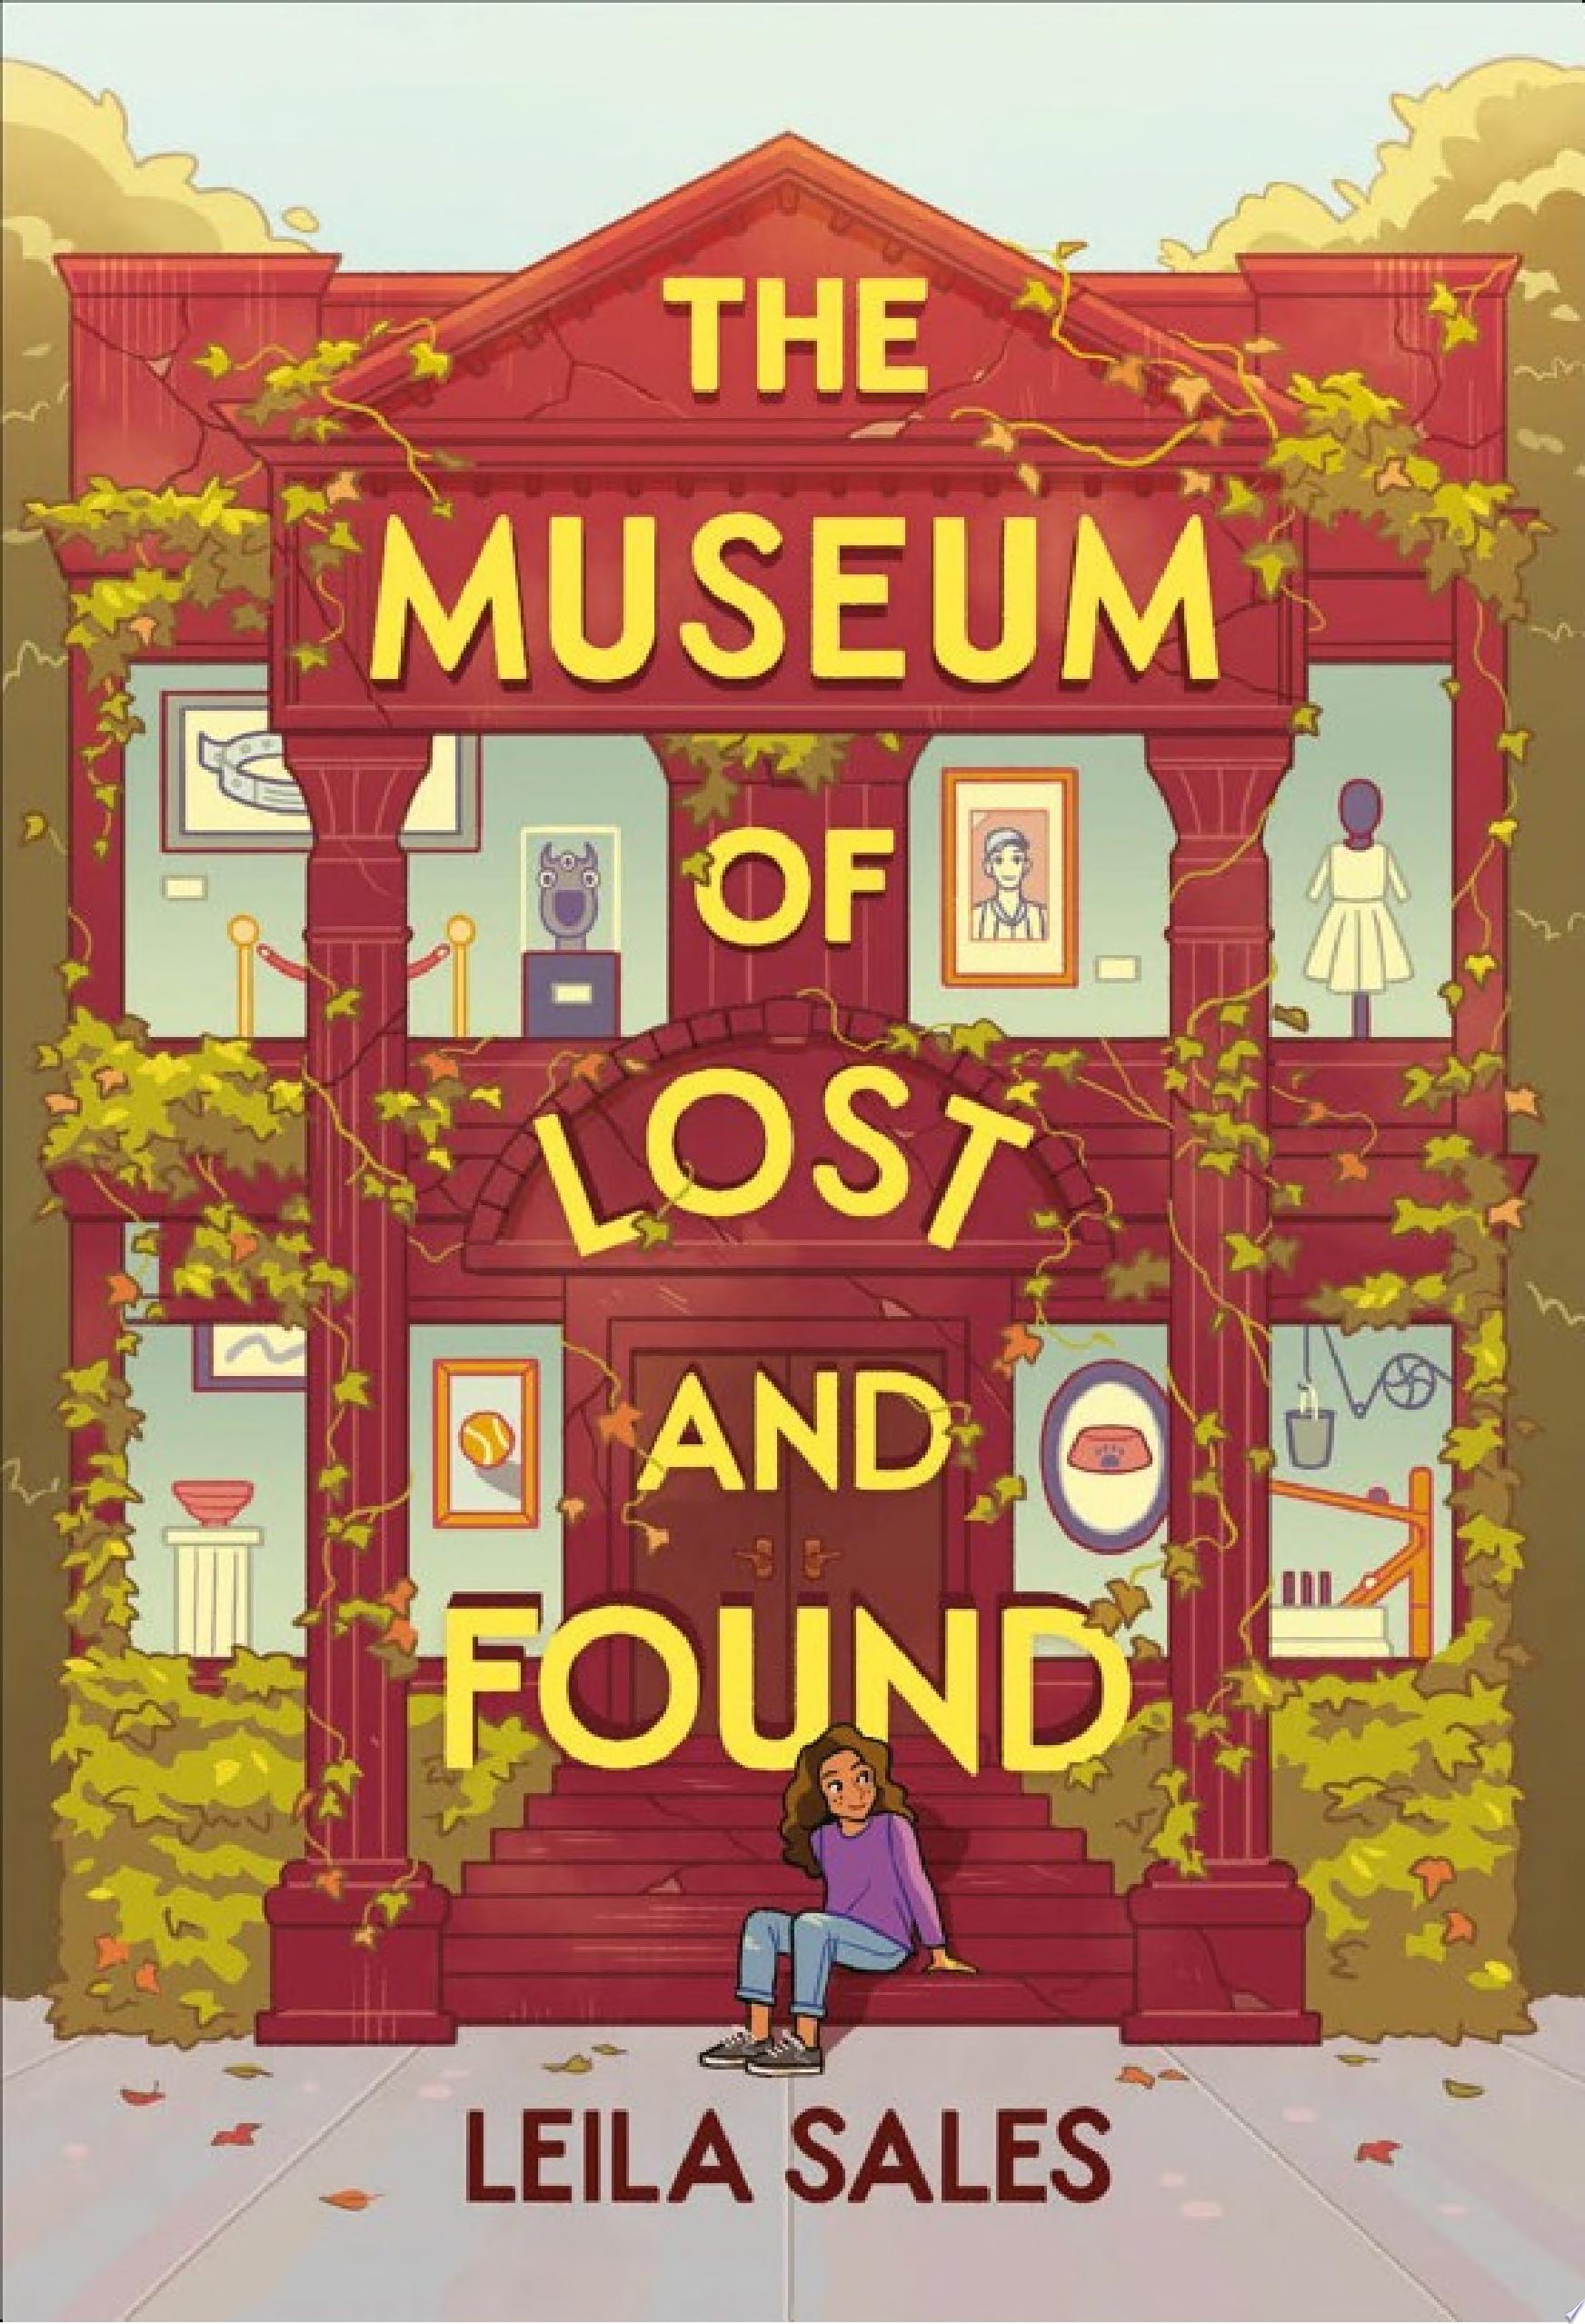 Image for "The Museum of Lost and Found"